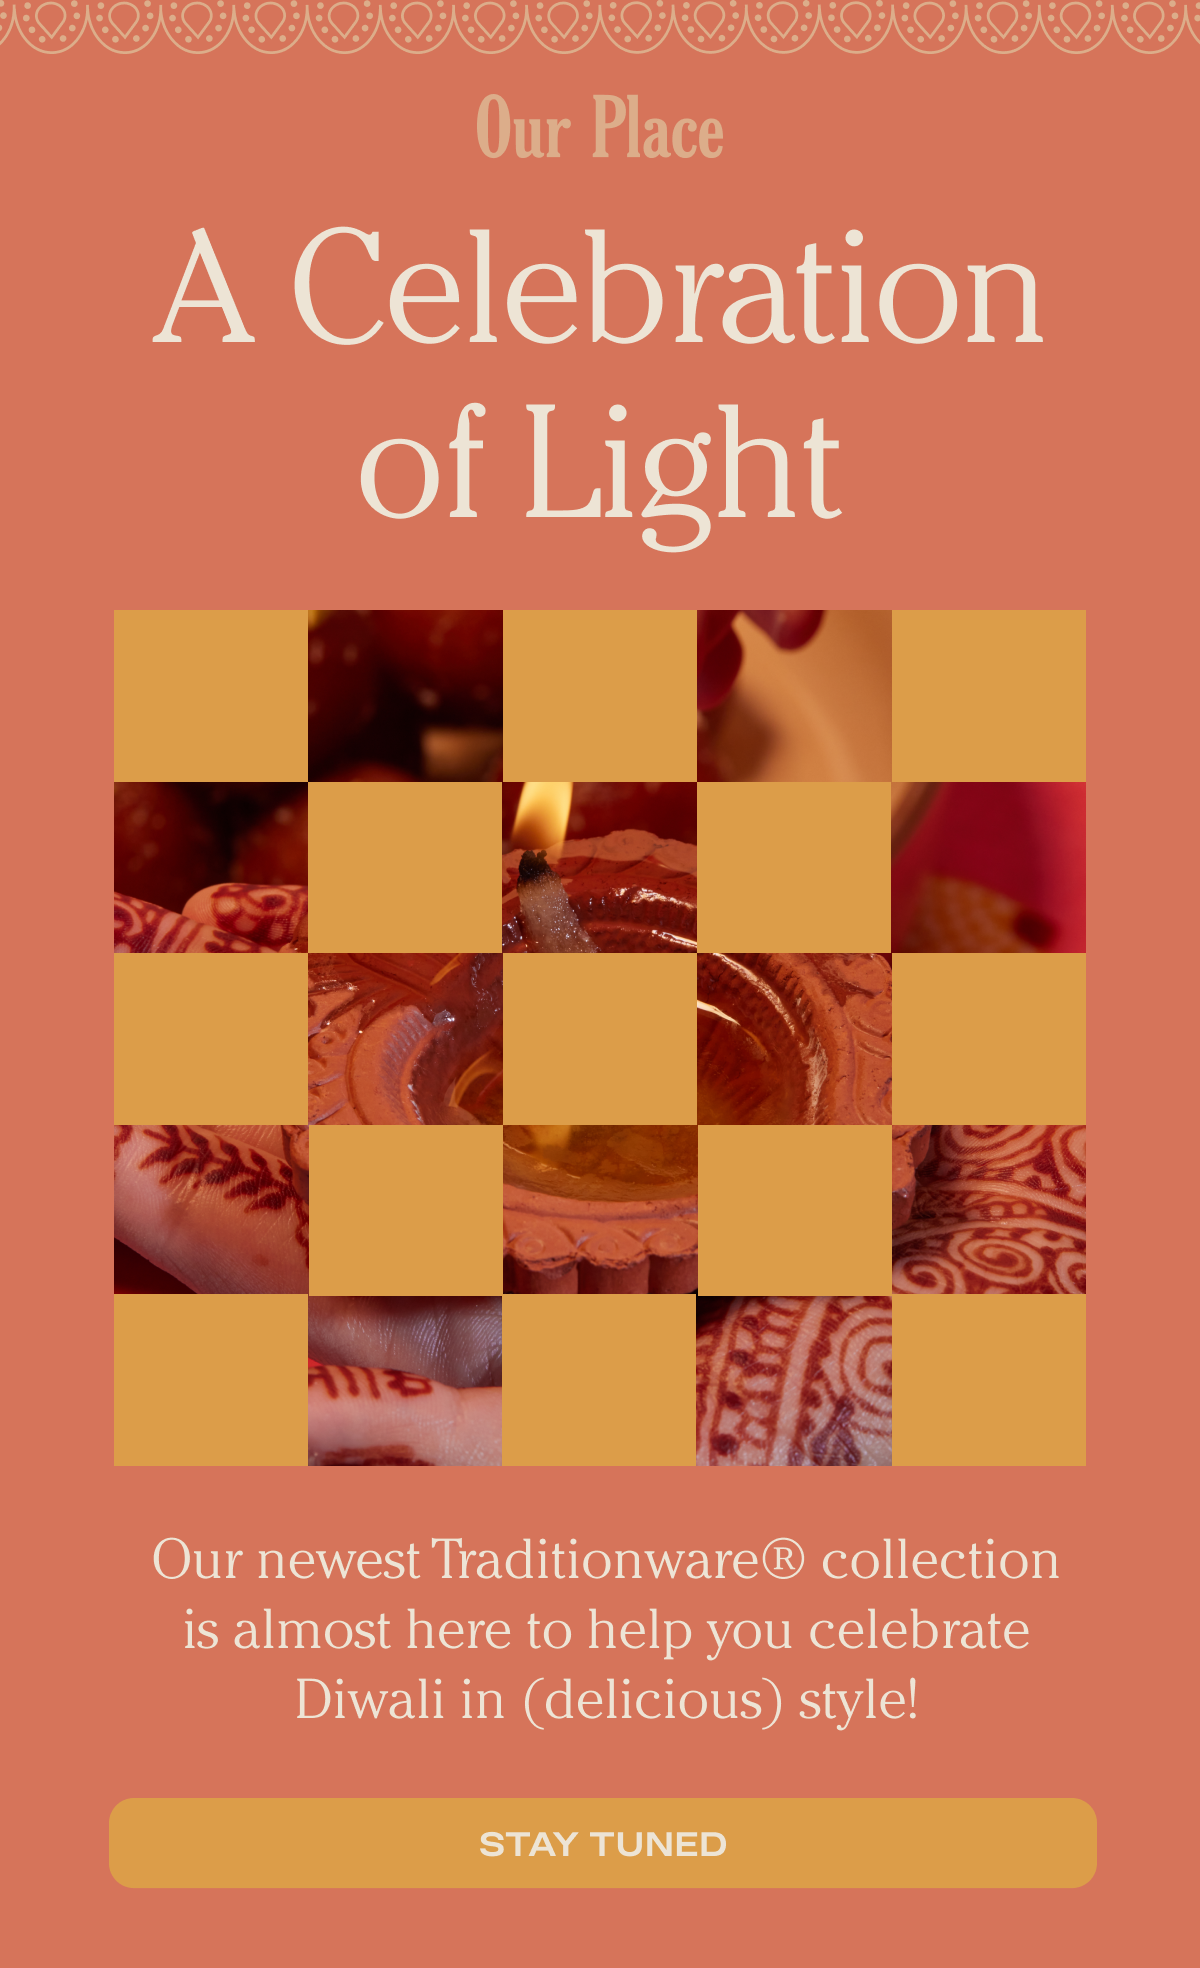 Our Place - A Celebration of Light - Our newest Traditionware® collection is almost here to help you celebrate Diwali in (delicious) style! - Stay Tuned